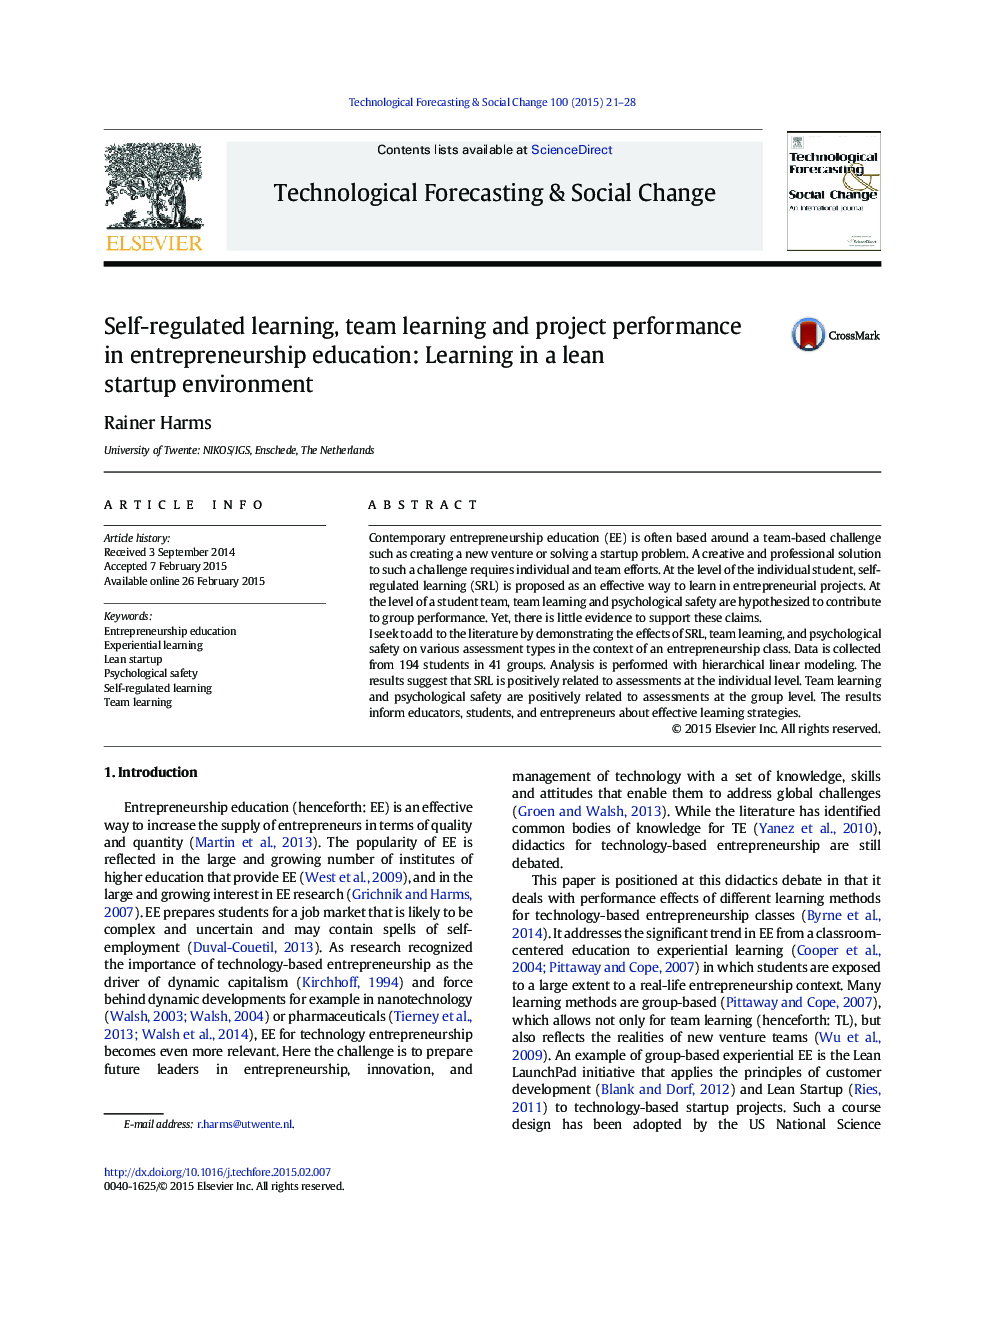 Self-regulated learning, team learning and project performance in entrepreneurship education: Learning in a lean startup environment